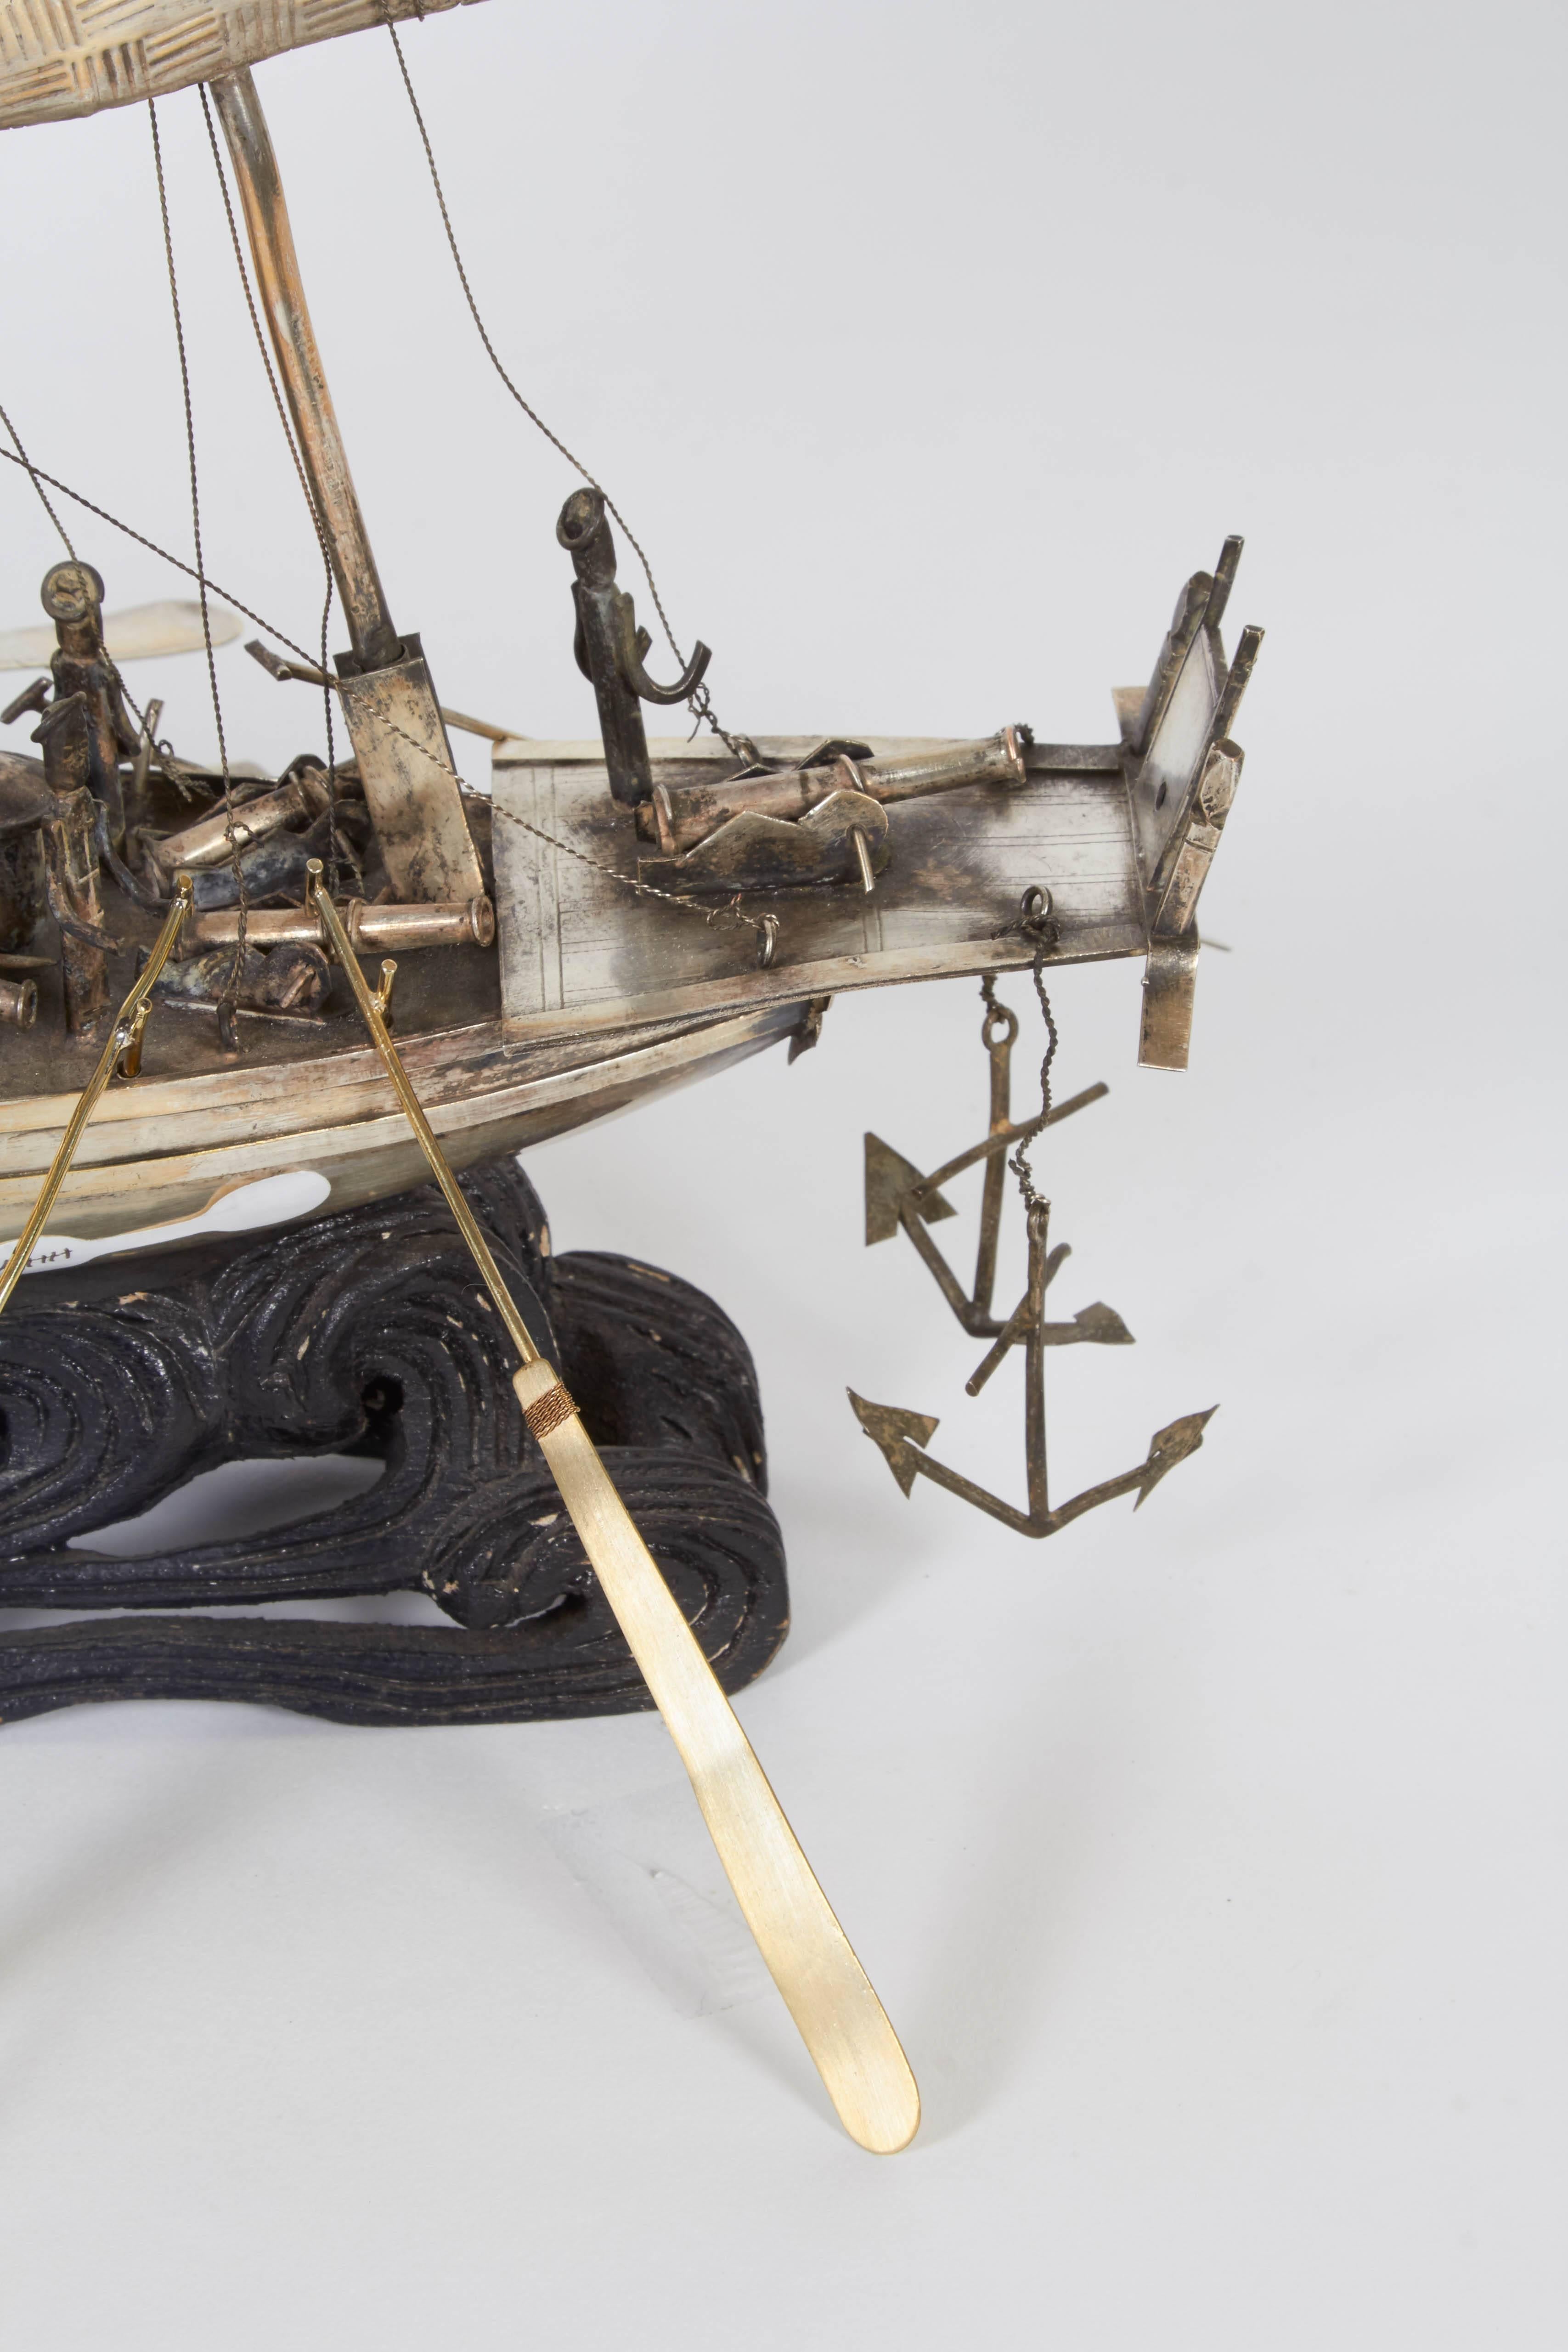 A Chinese export decorative model battleship, produced within the early 20th century period, crafted of hammered and soldered mixed metals, with seven cannons, sailors and articulating oars, mounted on a black carved wood stand, emulating crashing